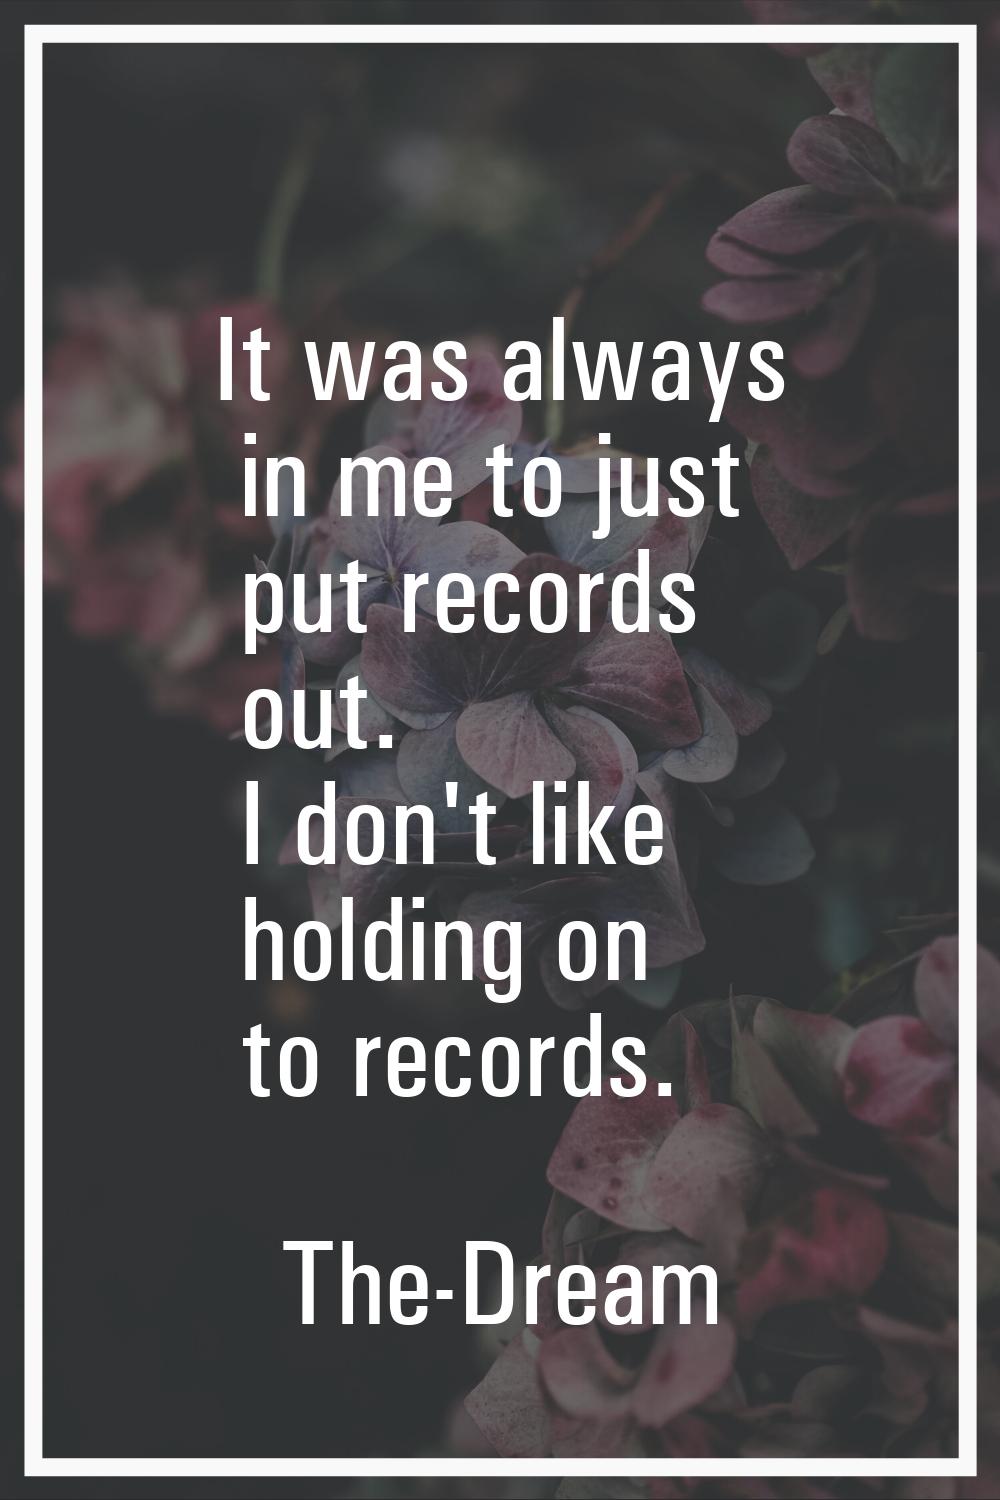 It was always in me to just put records out. I don't like holding on to records.